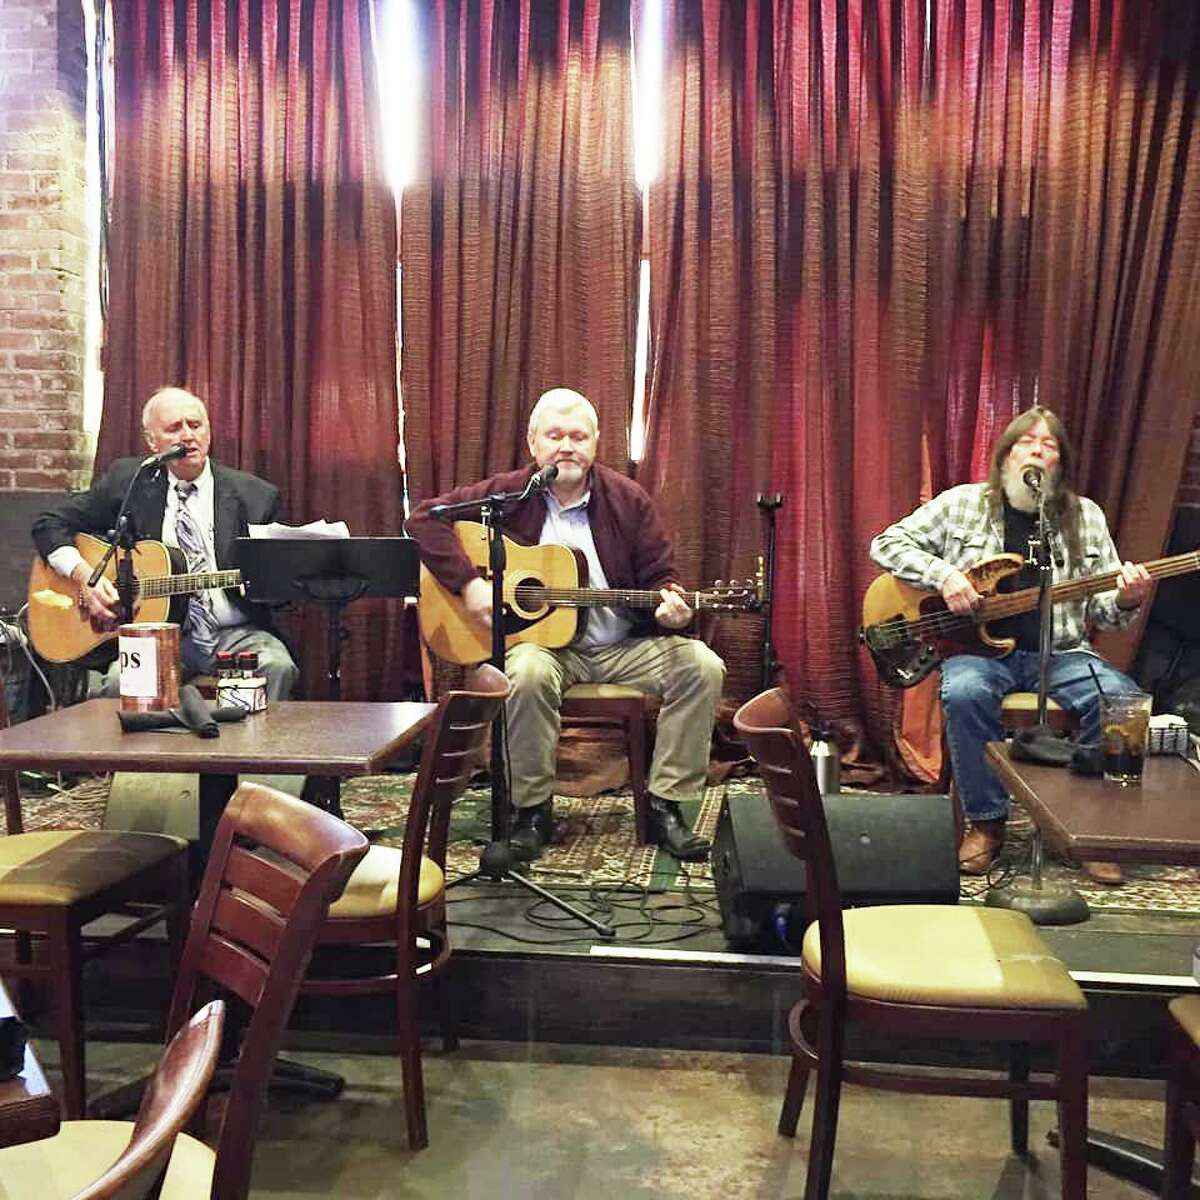 The Jim Sloan Trio, from left, includes Jim Sloan, Bobby Nichols and Claude Wooley. They are back performing in the Sunday Gospel Brunch at The Red Brick Tavern at 11:30 a.m.